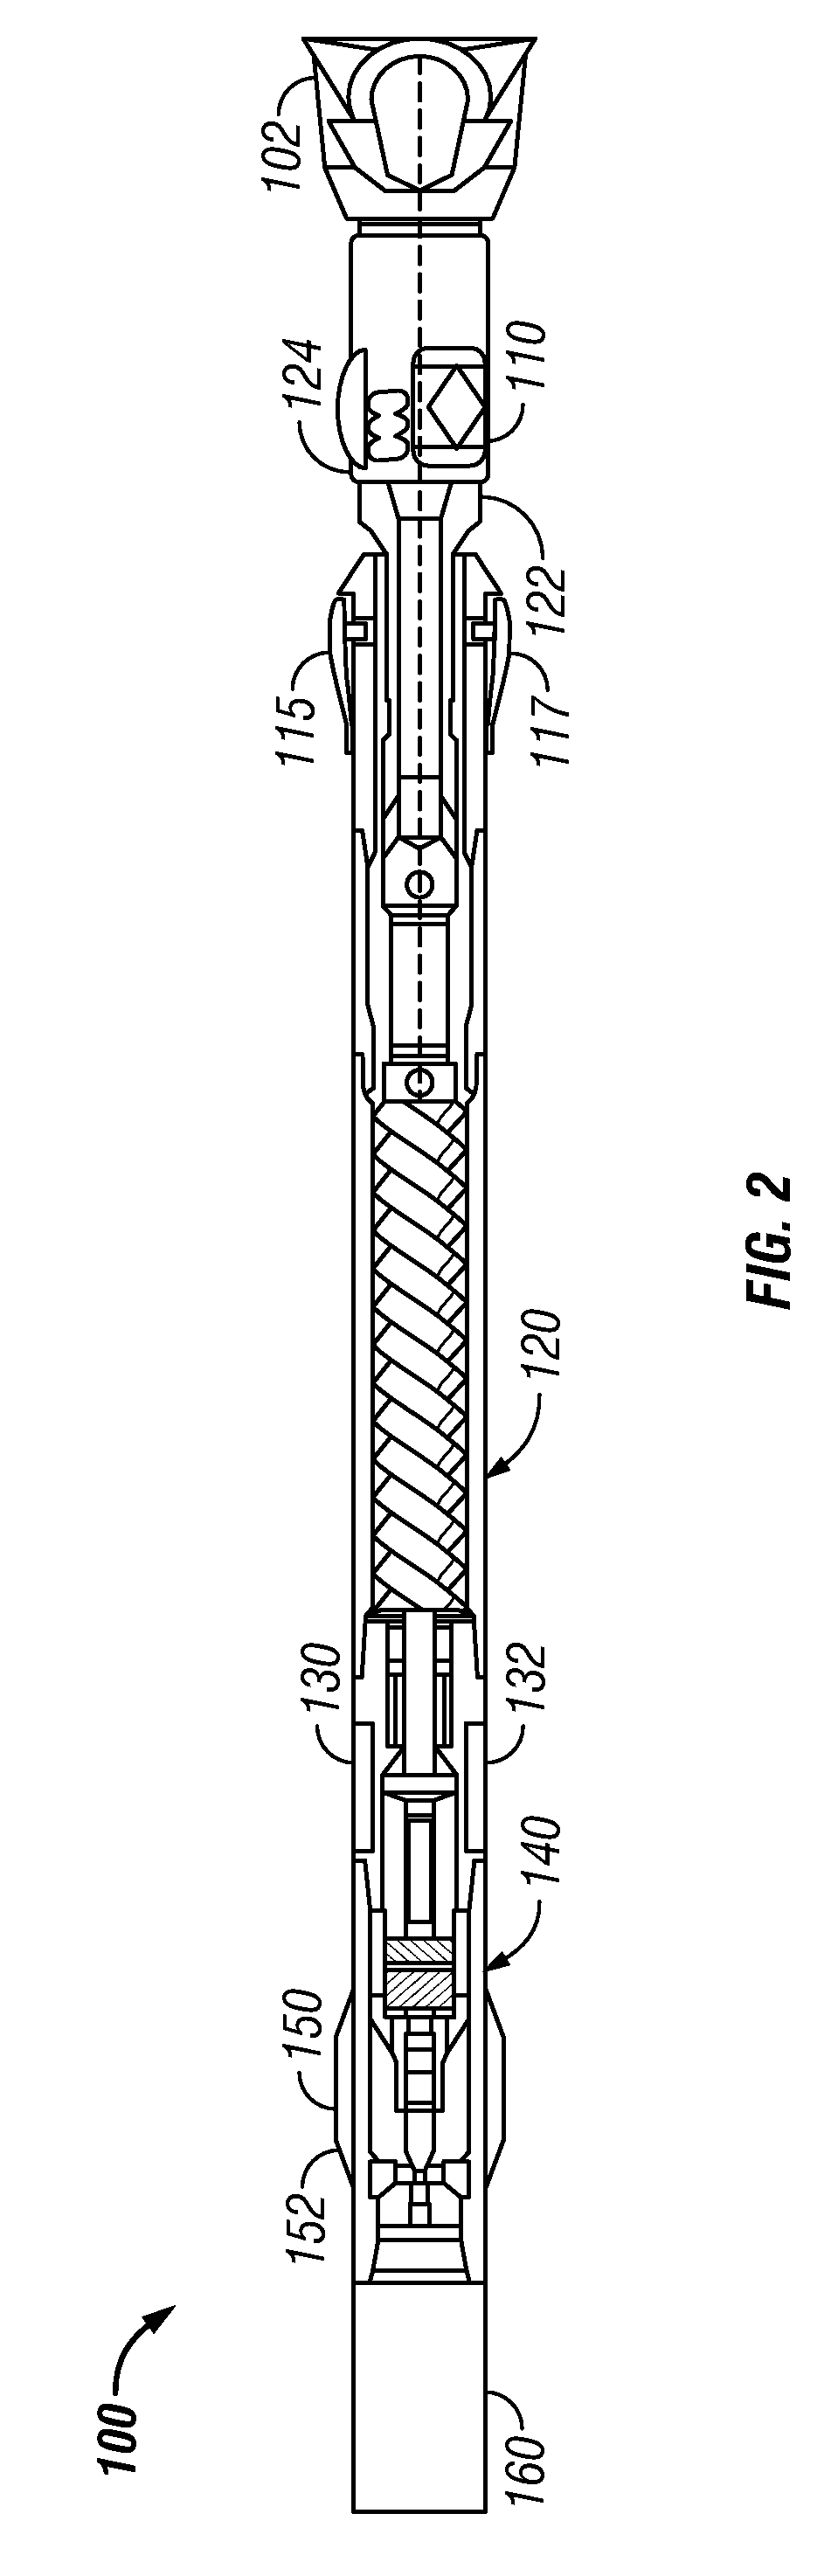 Automated steerable hole enlargement drilling device and methods